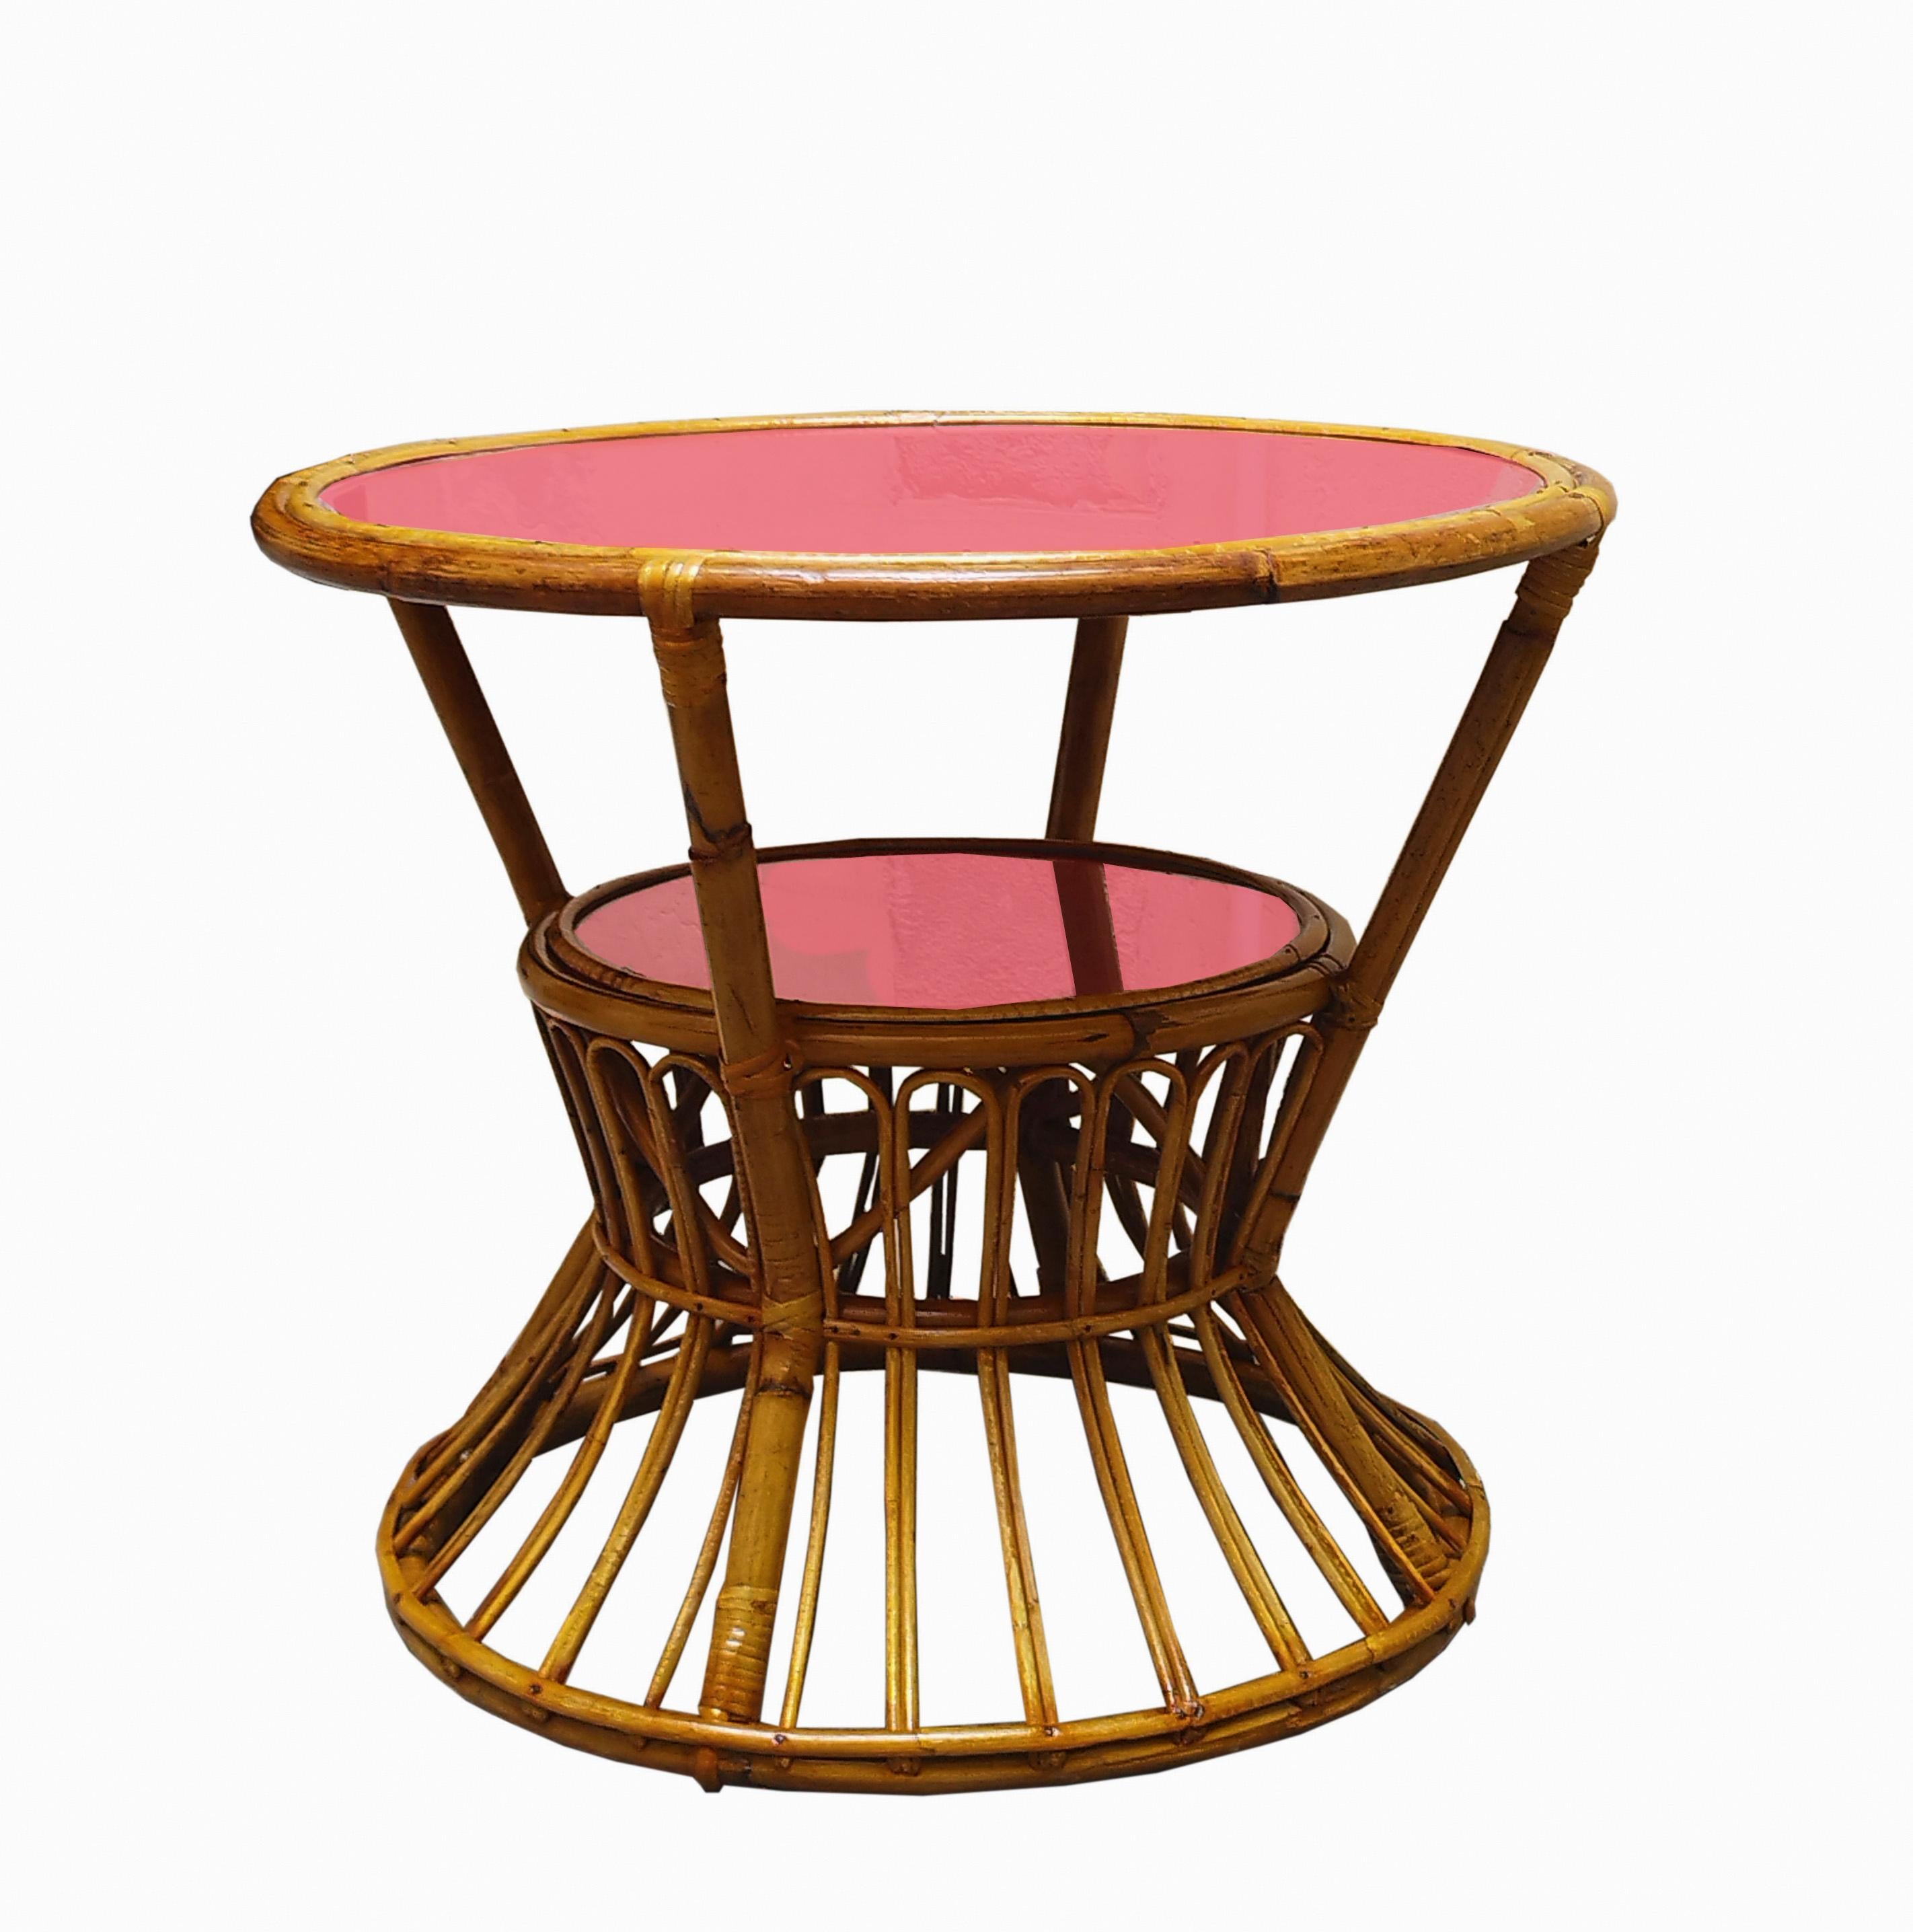 Round bamboo coffee table with red glass top designed in 1960s Italy by Tito Agnoli.